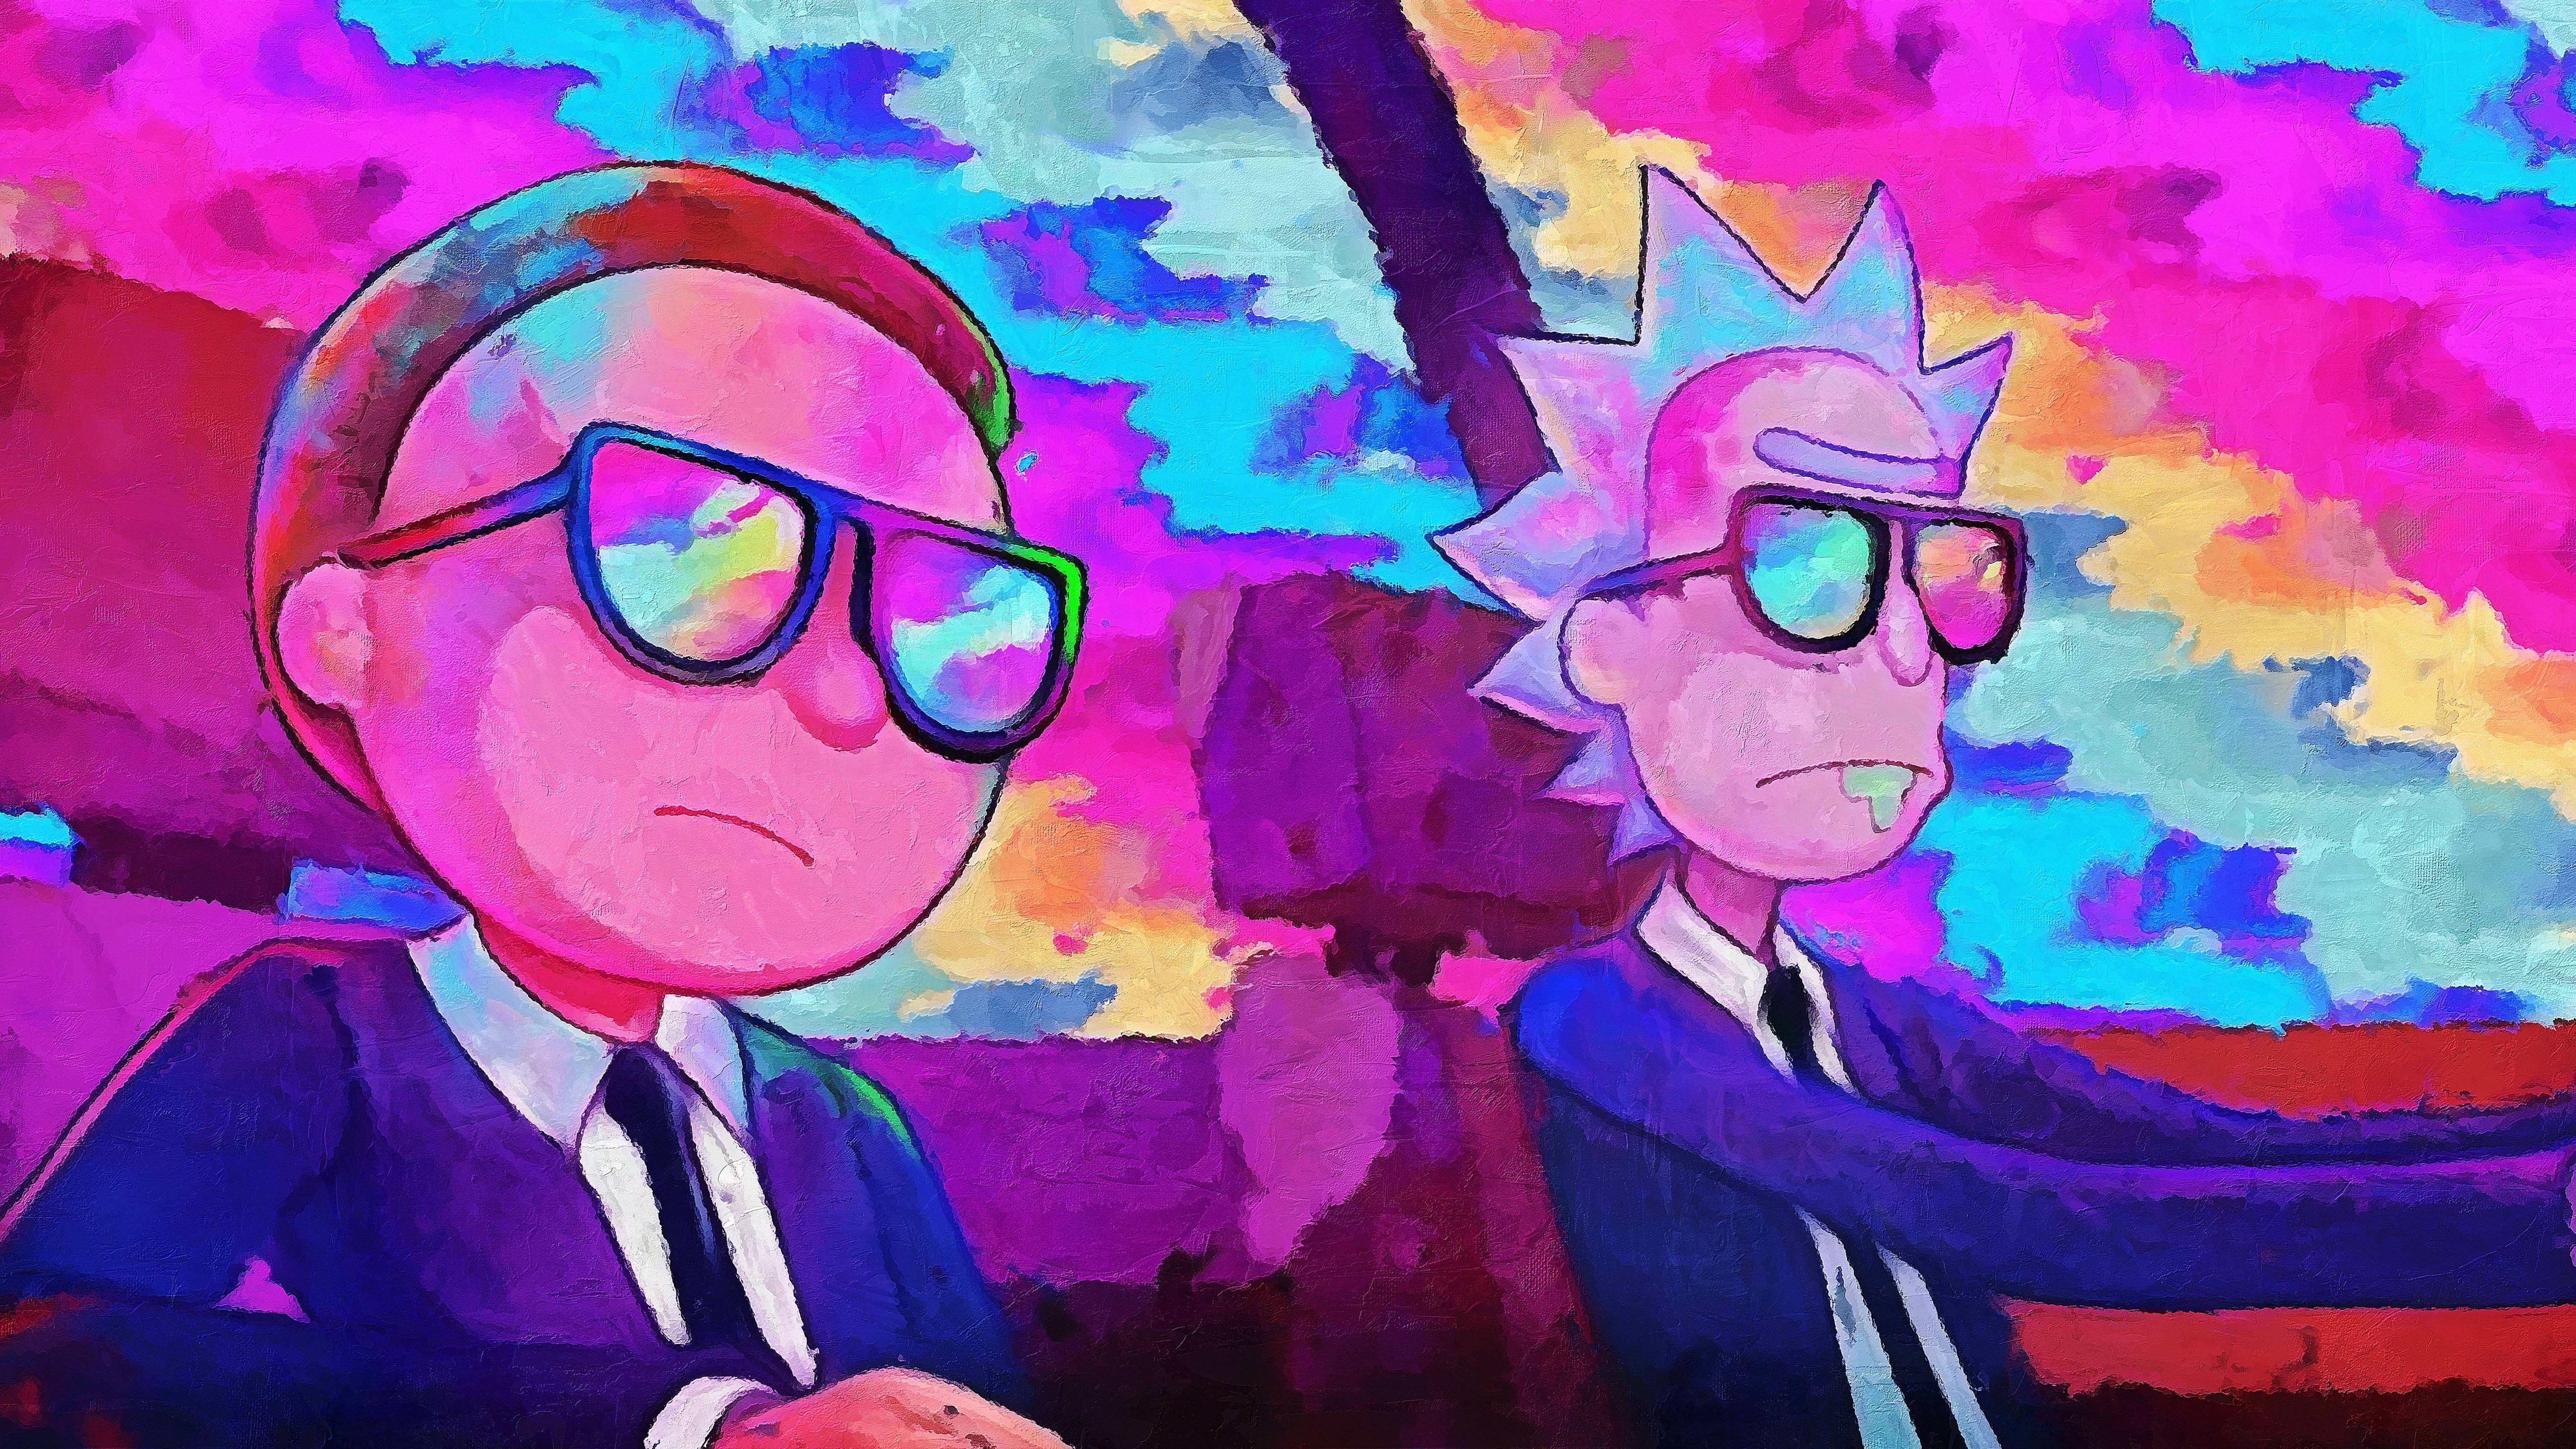 Rick Sanchez, Morty Smith, Rick and Morty, Cartoon, Psychedelic, Tv series, TV, Colorful, Glasses Wallpaper